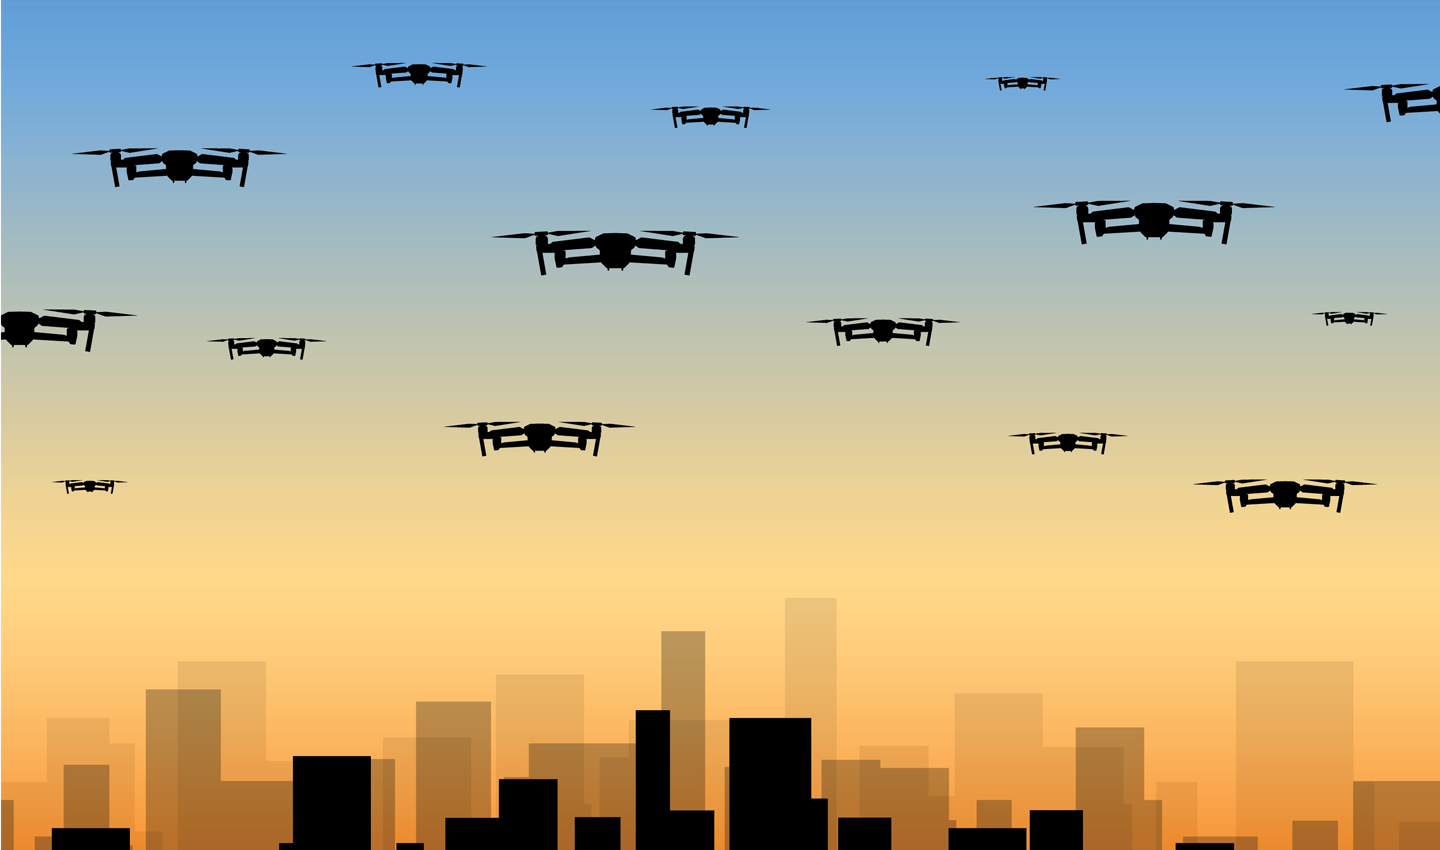 Illustration of a set of drones over a city.